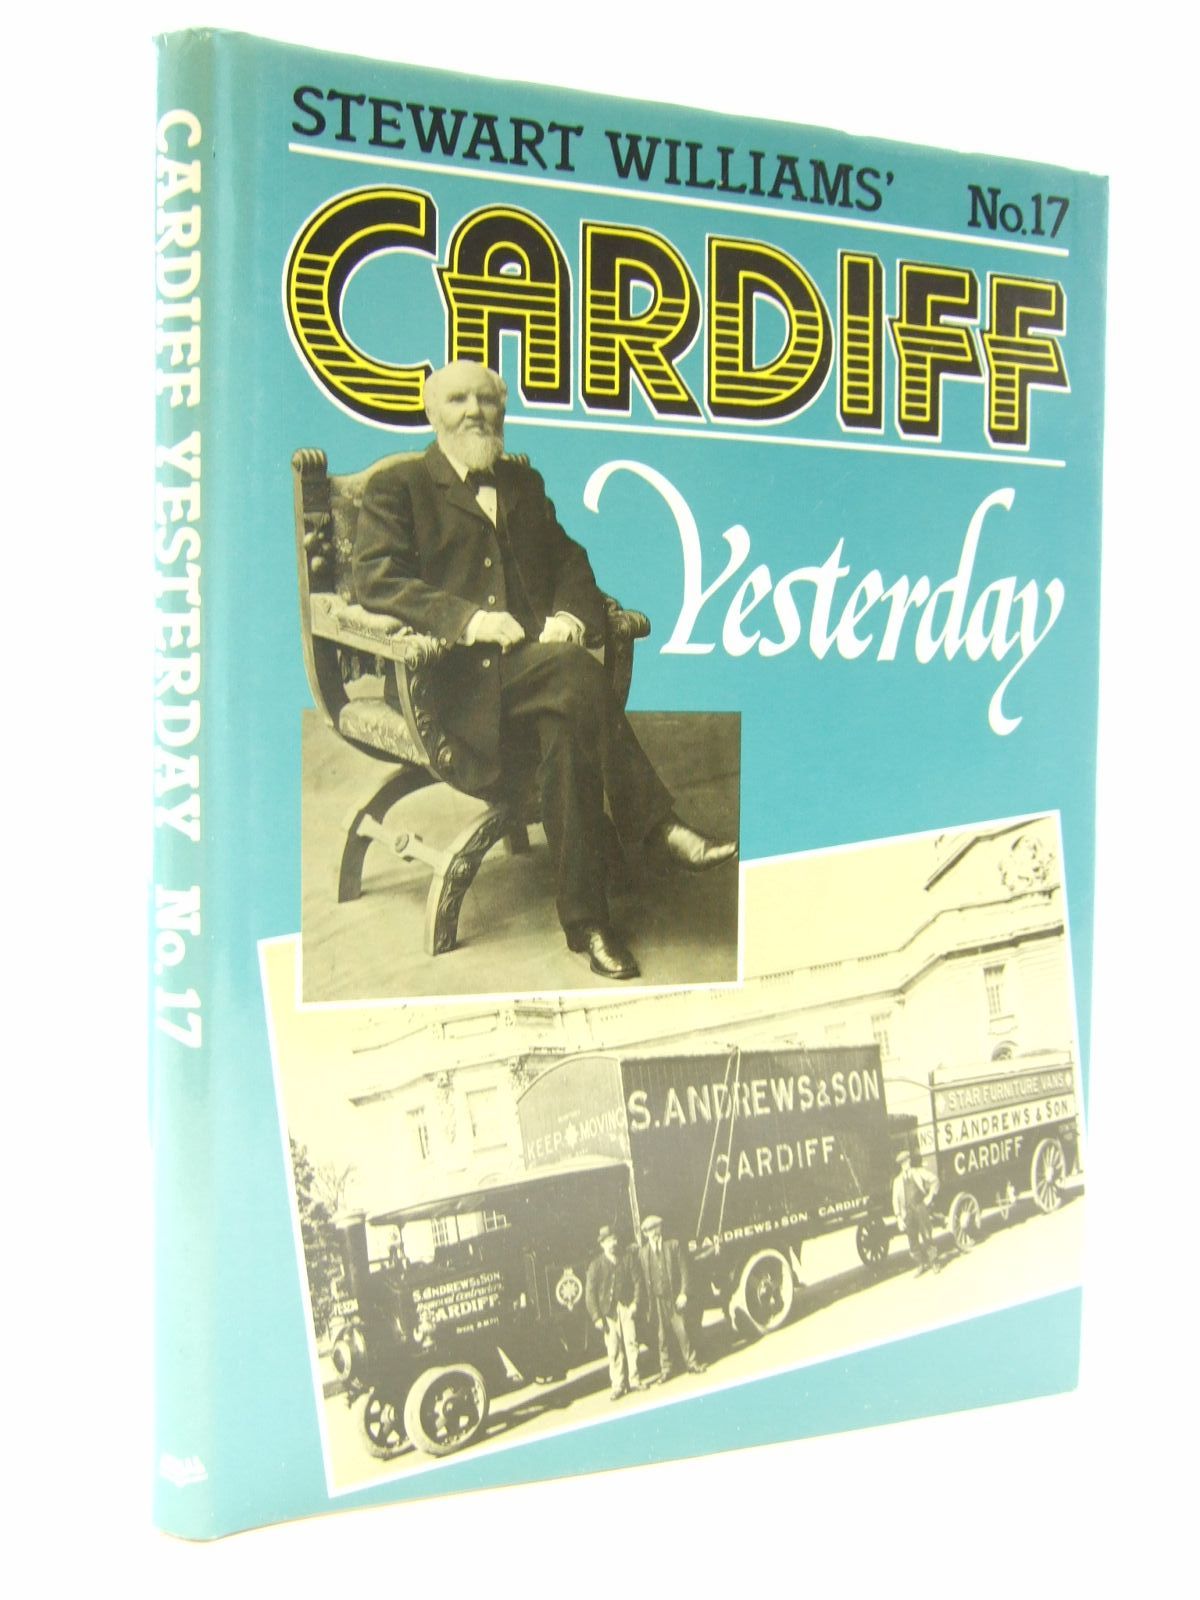 Photo of CARDIFF YESTERDAY No. 17 written by Williams, Stewart published by Stewart Williams (STOCK CODE: 1707239)  for sale by Stella & Rose's Books